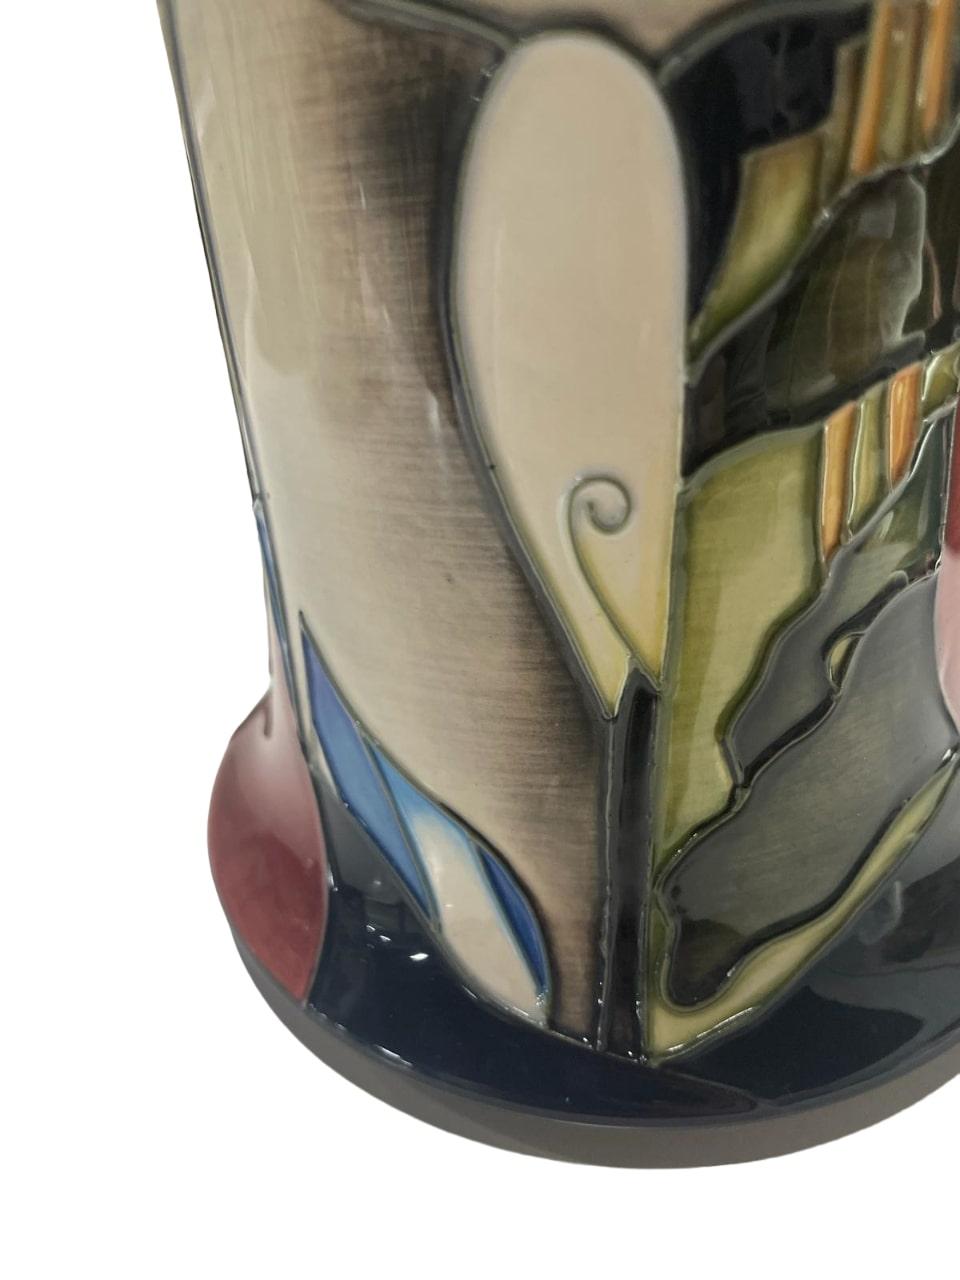 Ceramic LIMITED EDITION MOORCROFT Wapiti vase by Emma Bossons dated 2012 31/35 For Sale